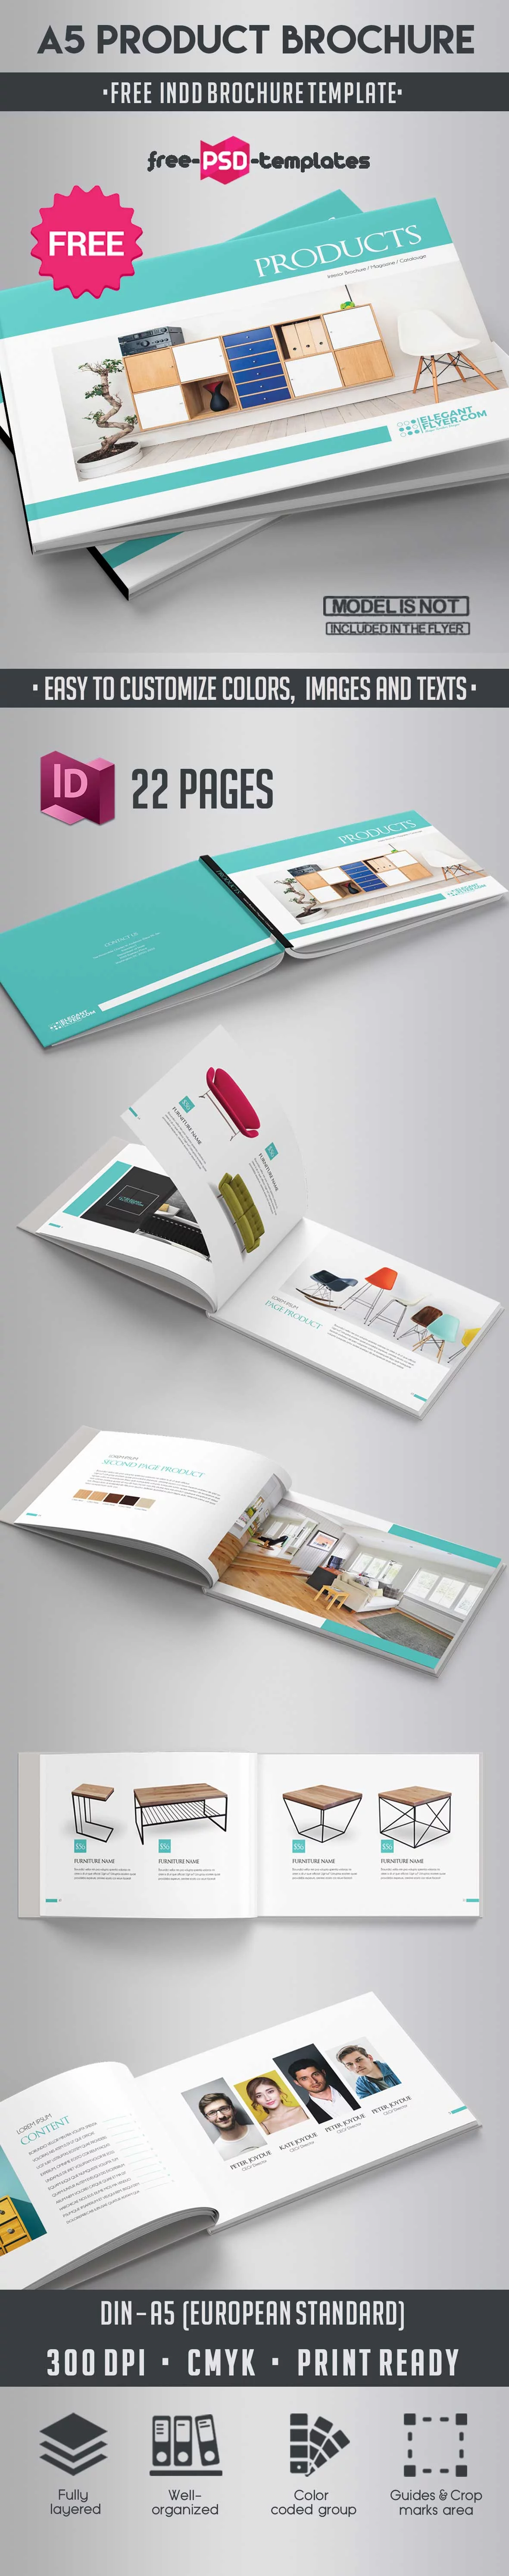 Free A5 Product Catalog Brochure Indd Template